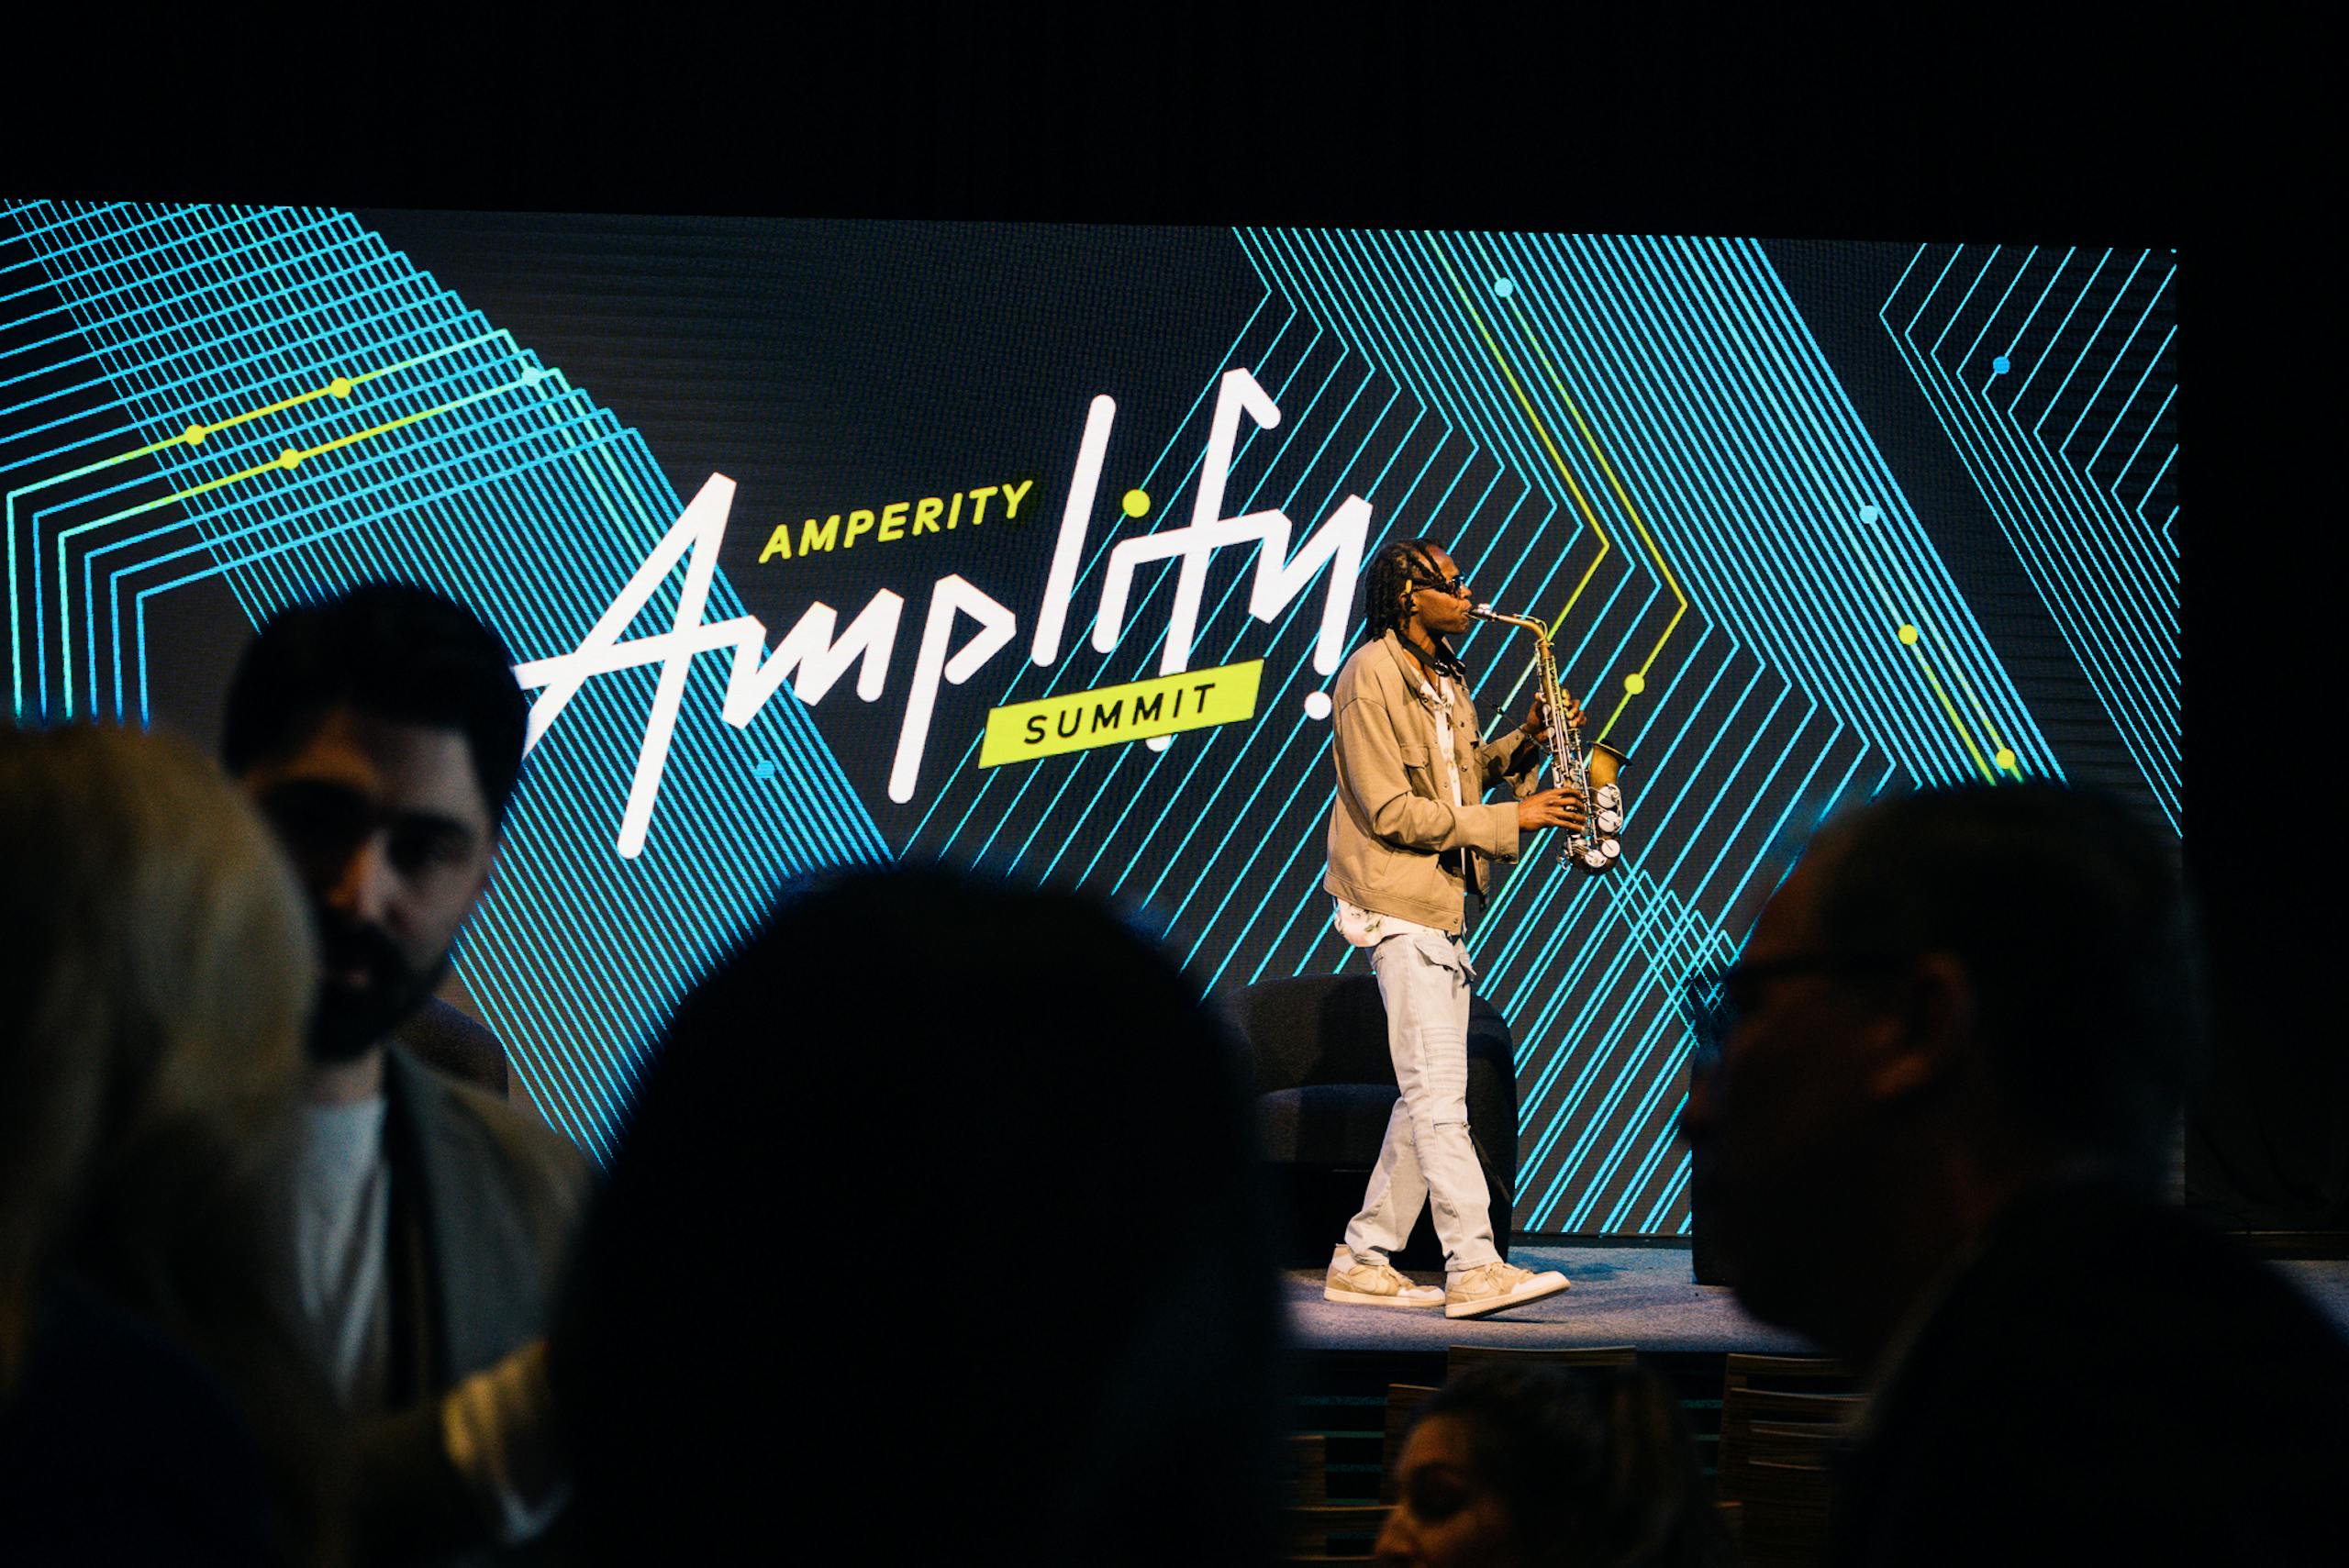 A saxophone player supplying some smooth tunes at Amplify, Amperity's annual summit